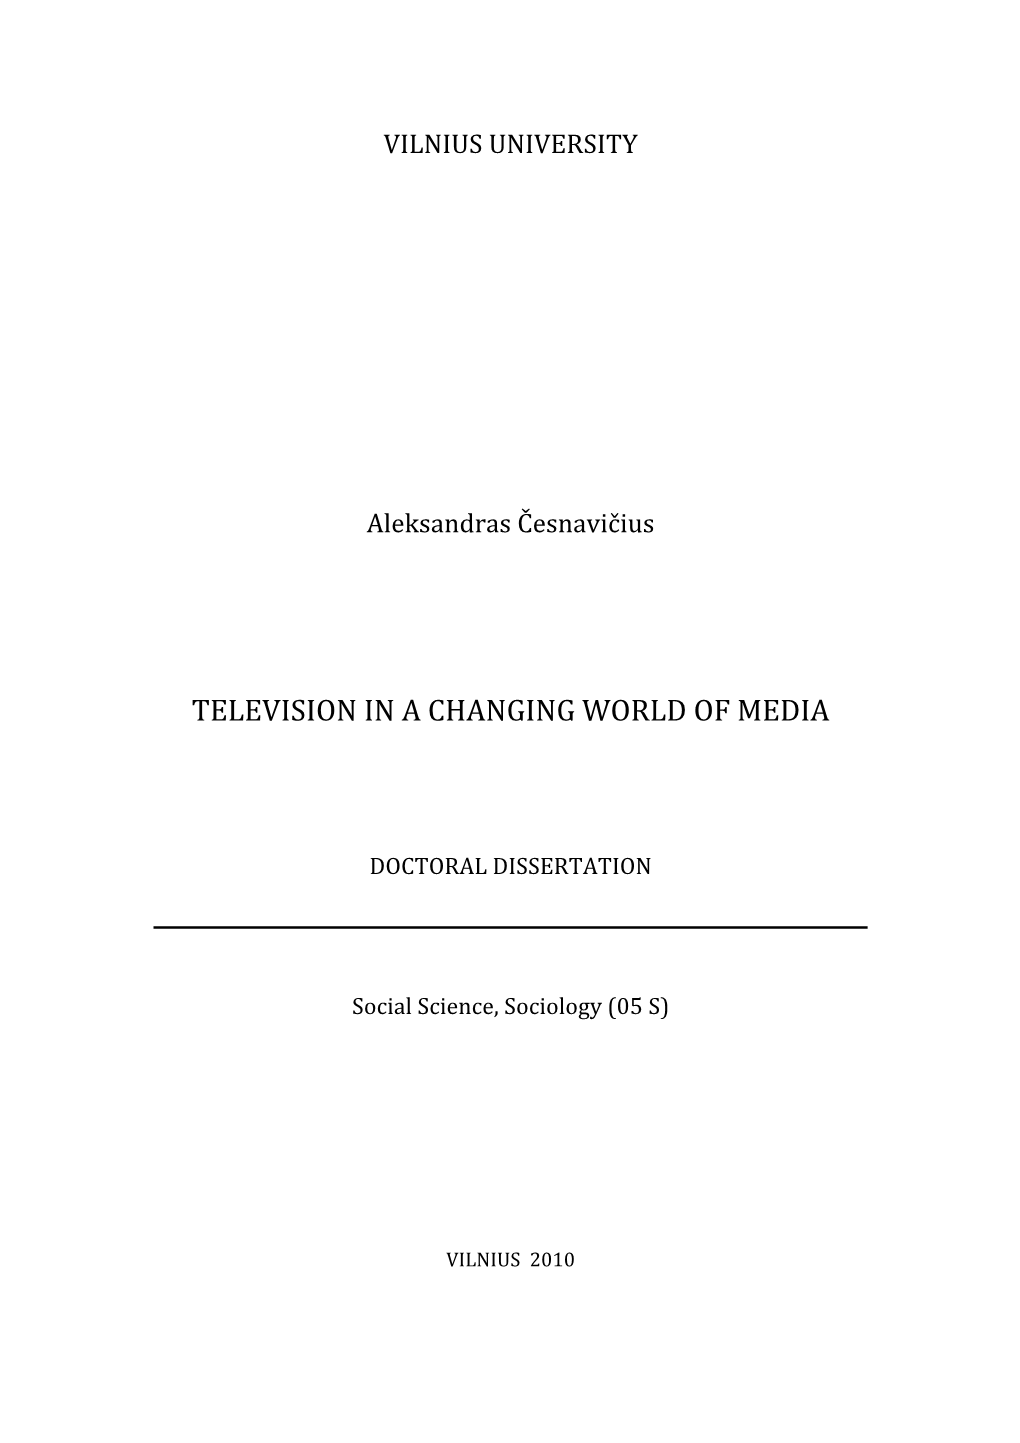 Television in a Changing World of Media